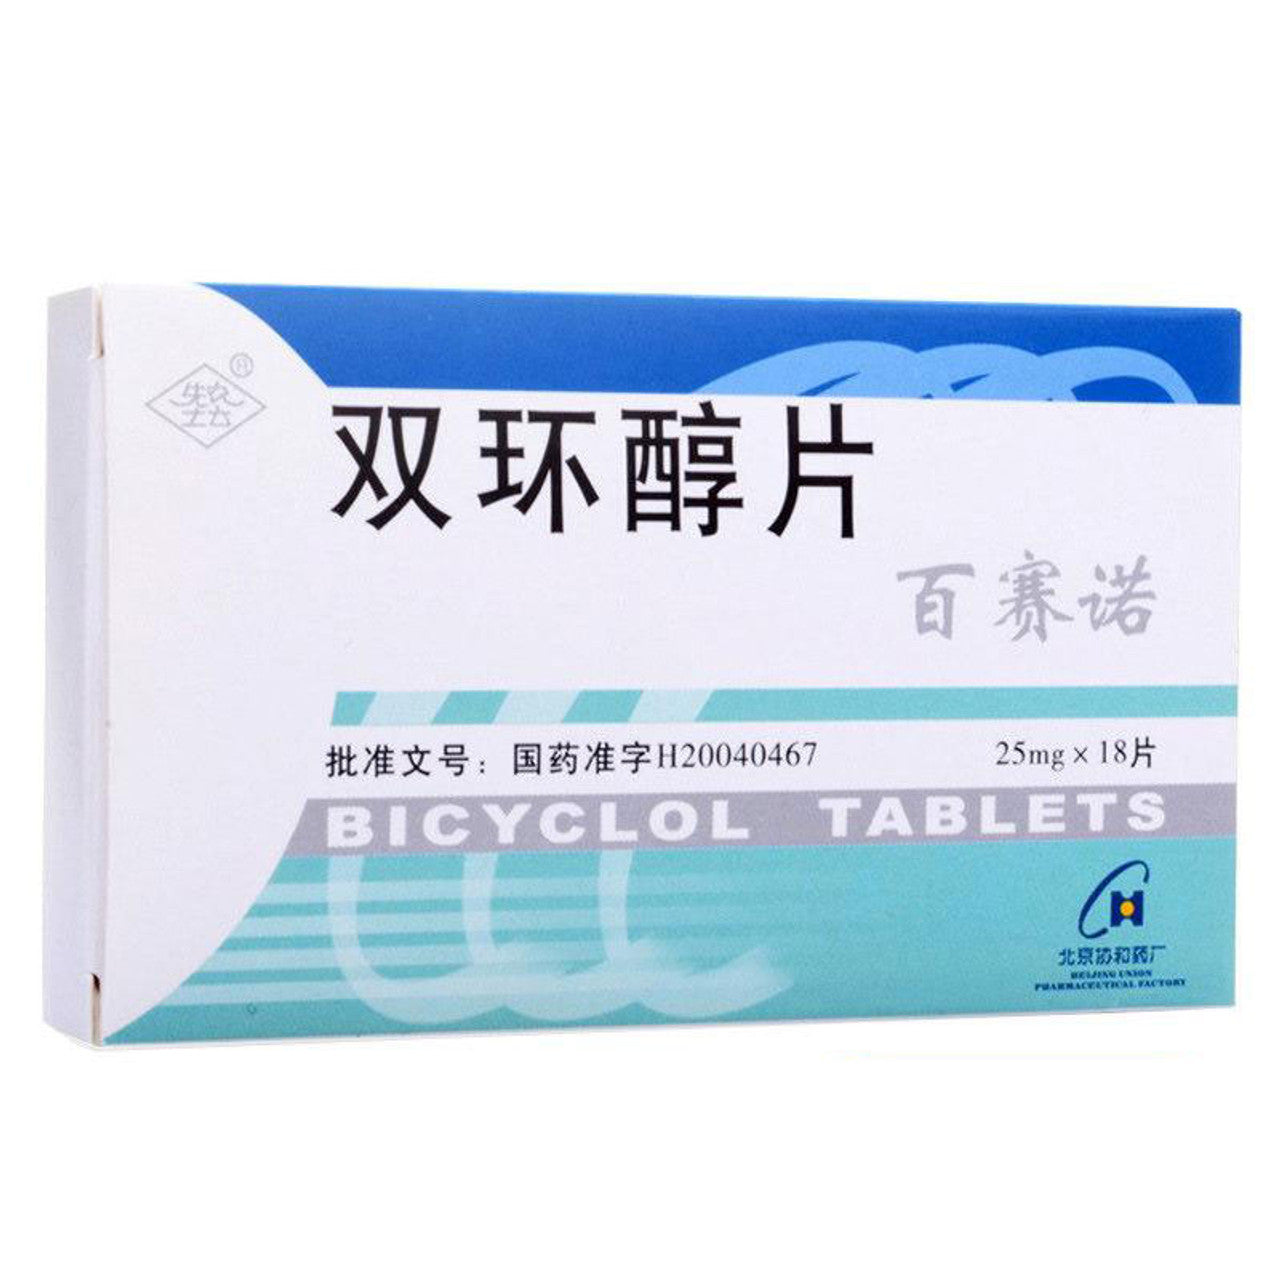 BAISAINUO BICYCLOL TABLETS For Hepatitis 25mg*18 Tablets*5 boxes